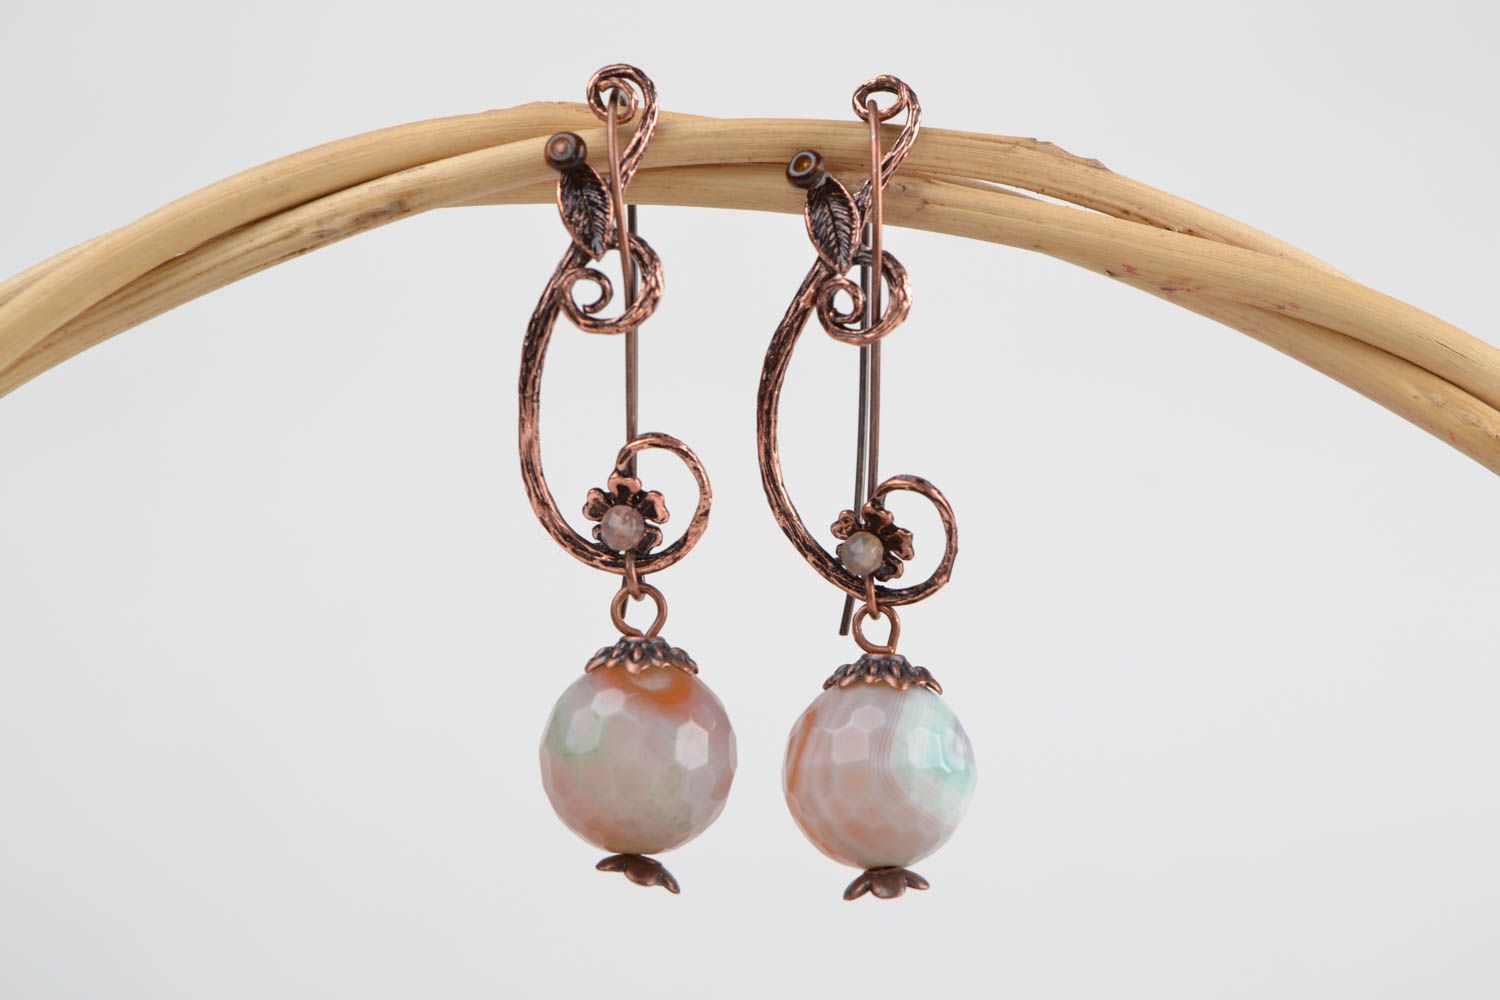 Handmade long dangling earrings with brown agate stone and fancy metal fittings photo 1